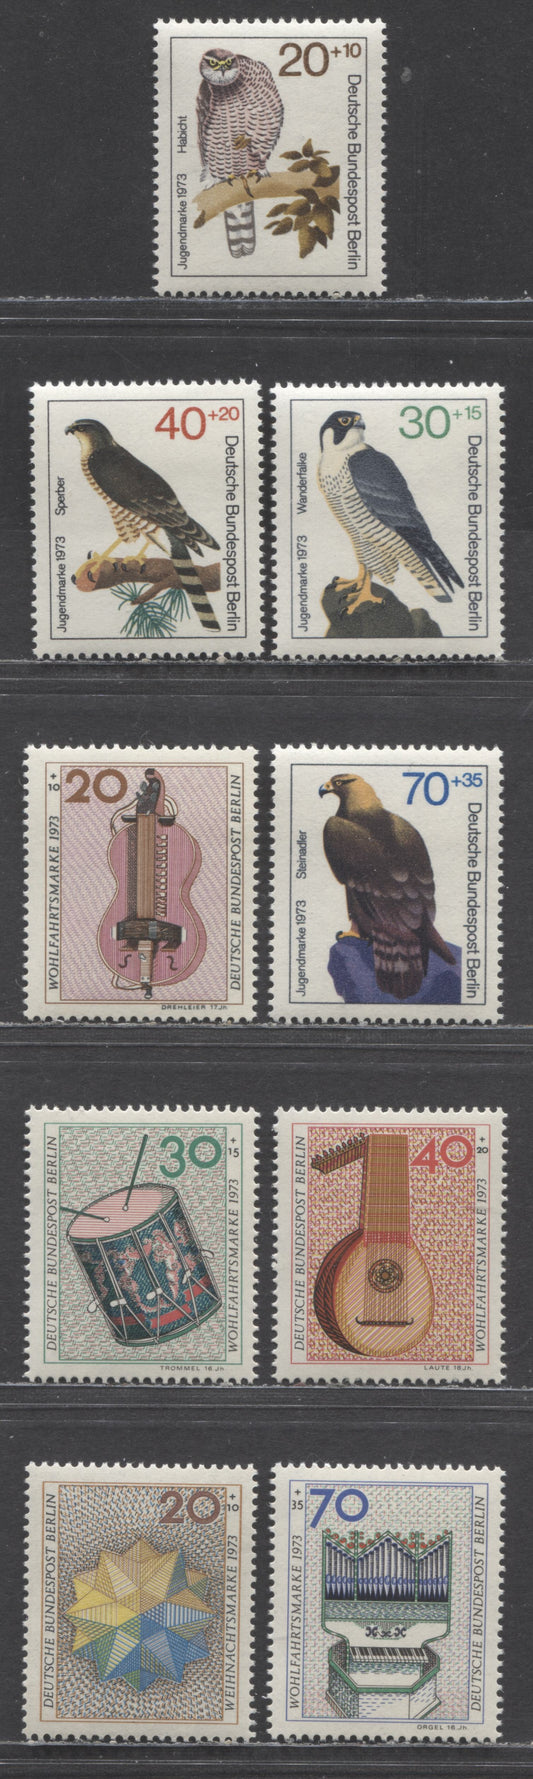 Berlin-Germany SC#9NB97-9NB105(Mi#442/463) 1973 SemiPostals Issue, 9 VFNH Singles, Click on Listing to See ALL Pictures, Estimated Value $9 USD